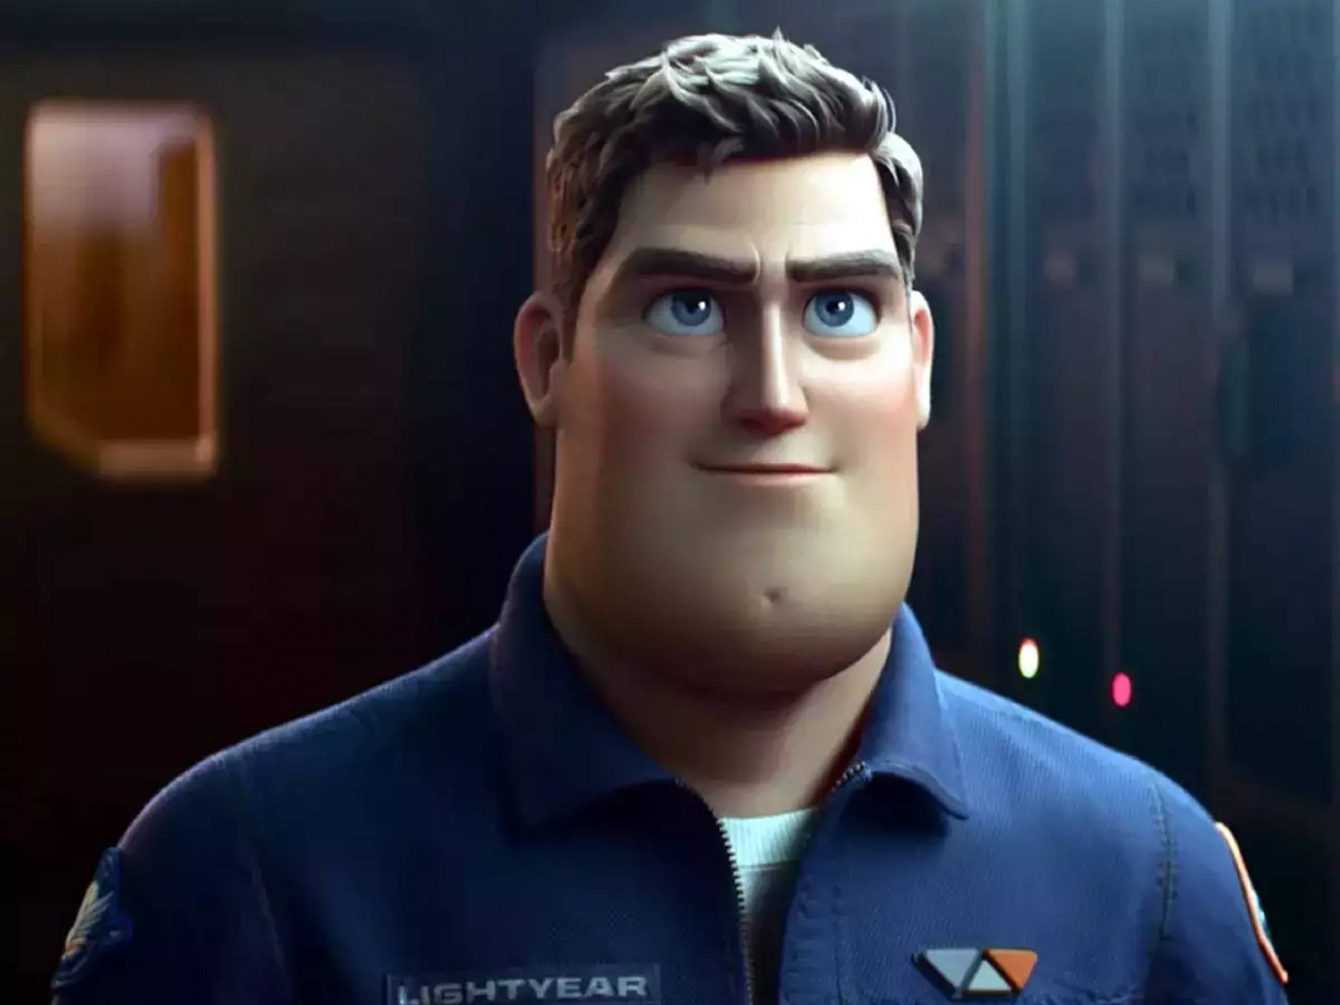 Lightyear - the true story of Buzz, from Pixar will be present at the cinema, but not in Cannes!